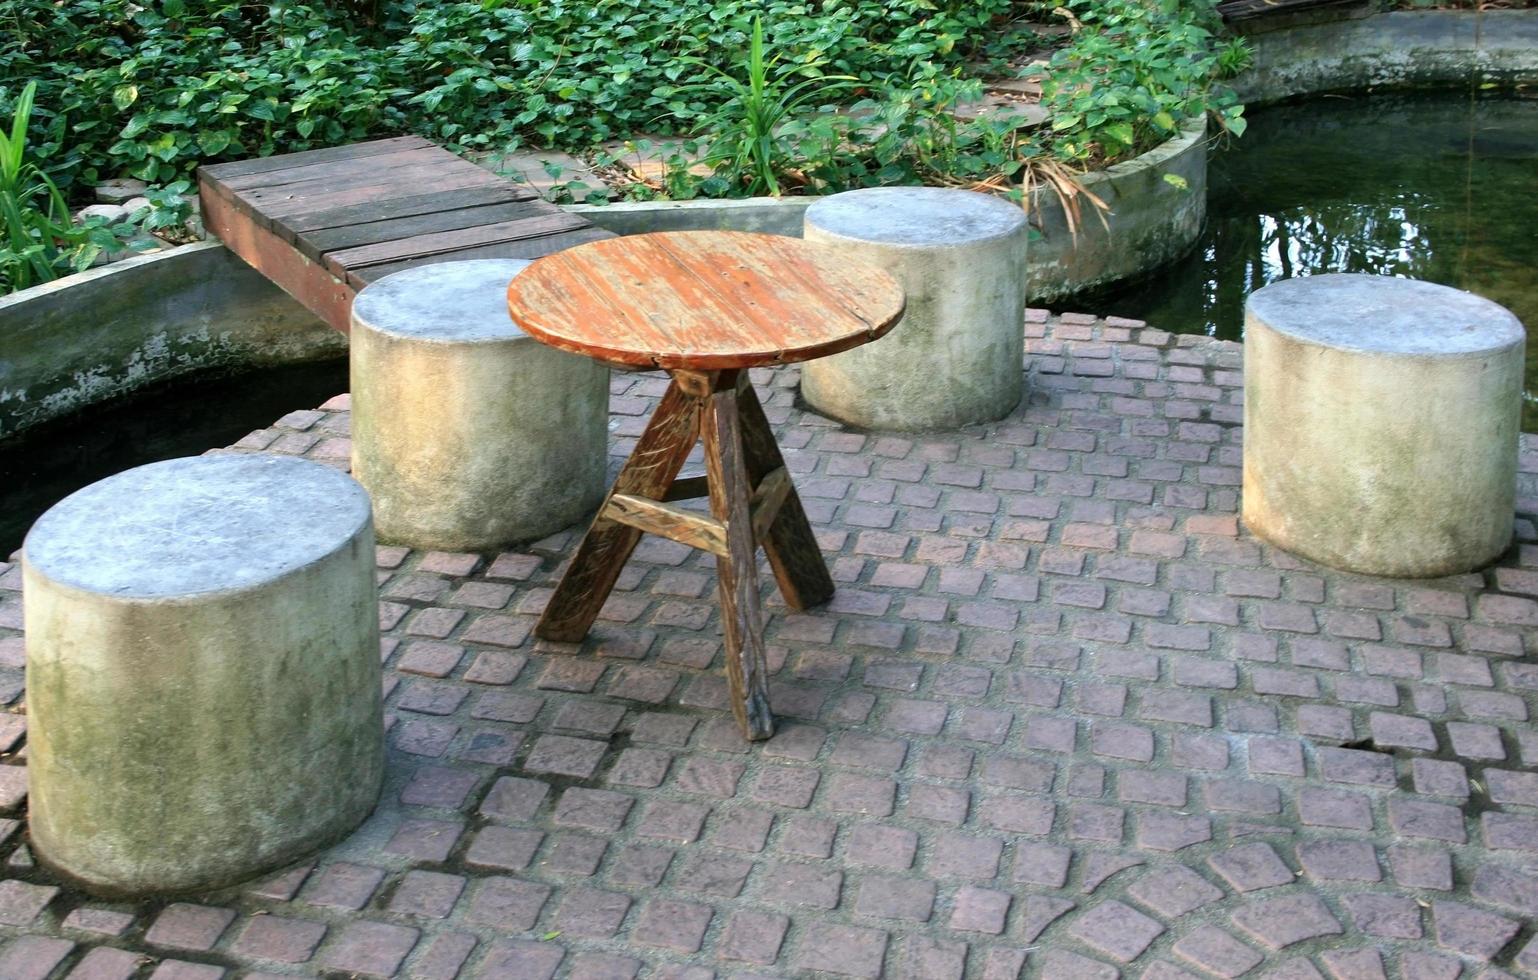 Spain, 2020 - Wooden circular table and  cement chairs in a park photo